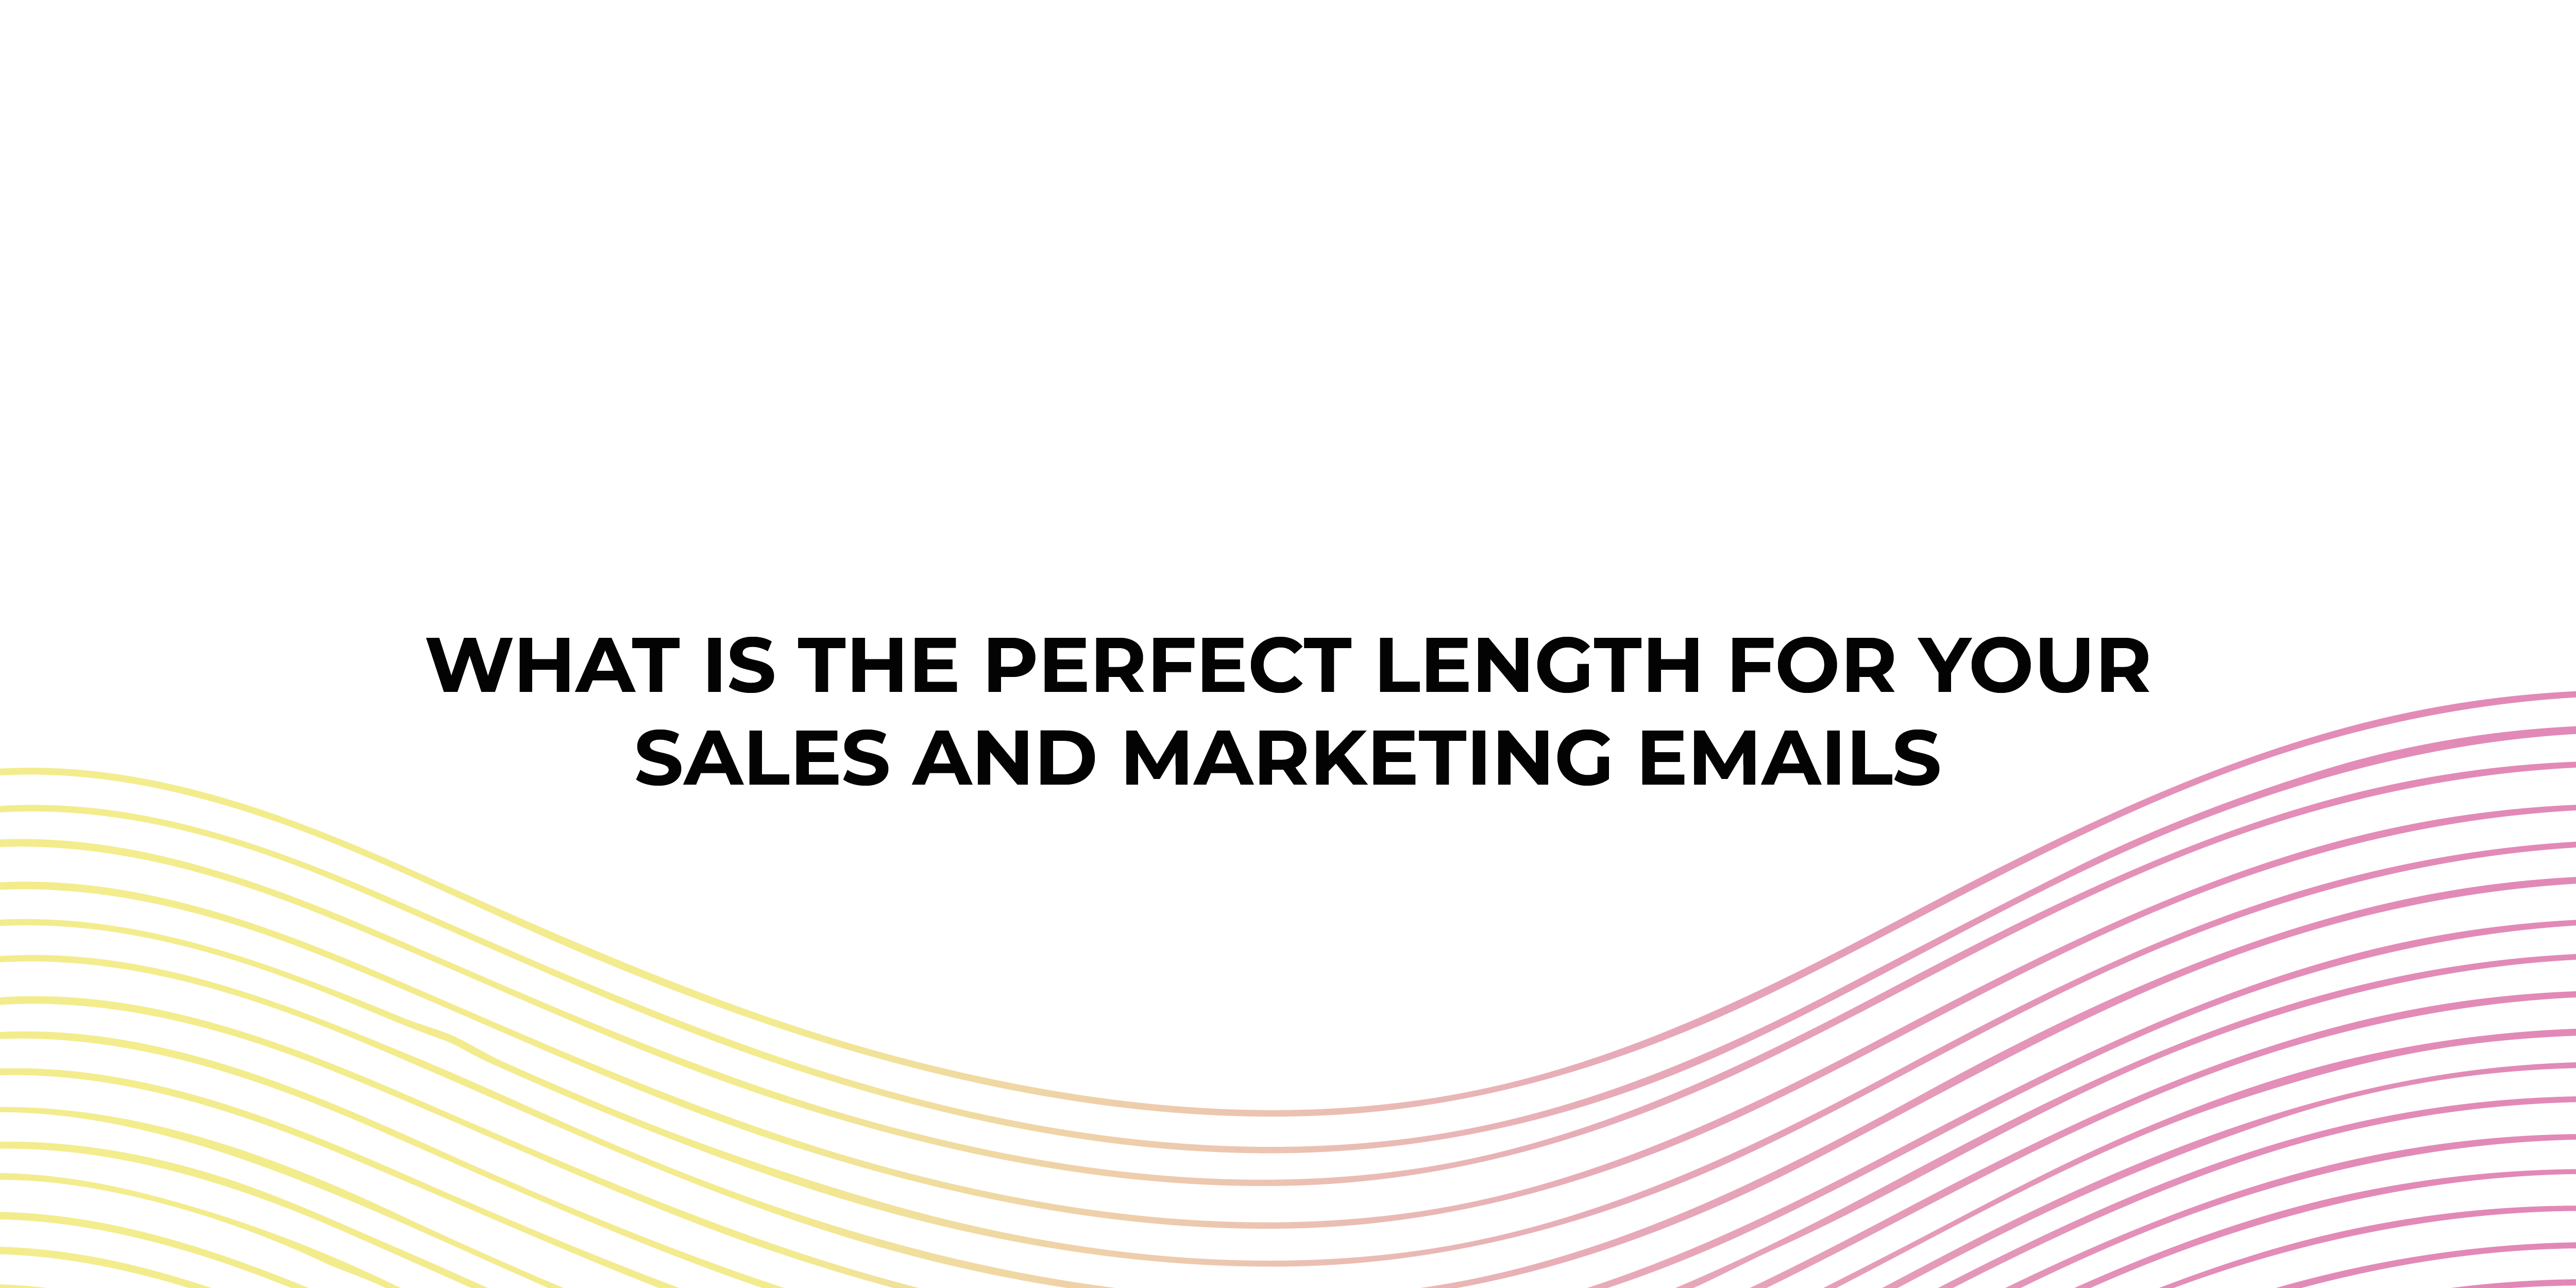 What Is The Perfect Length for Your Sales & Marketing Emails